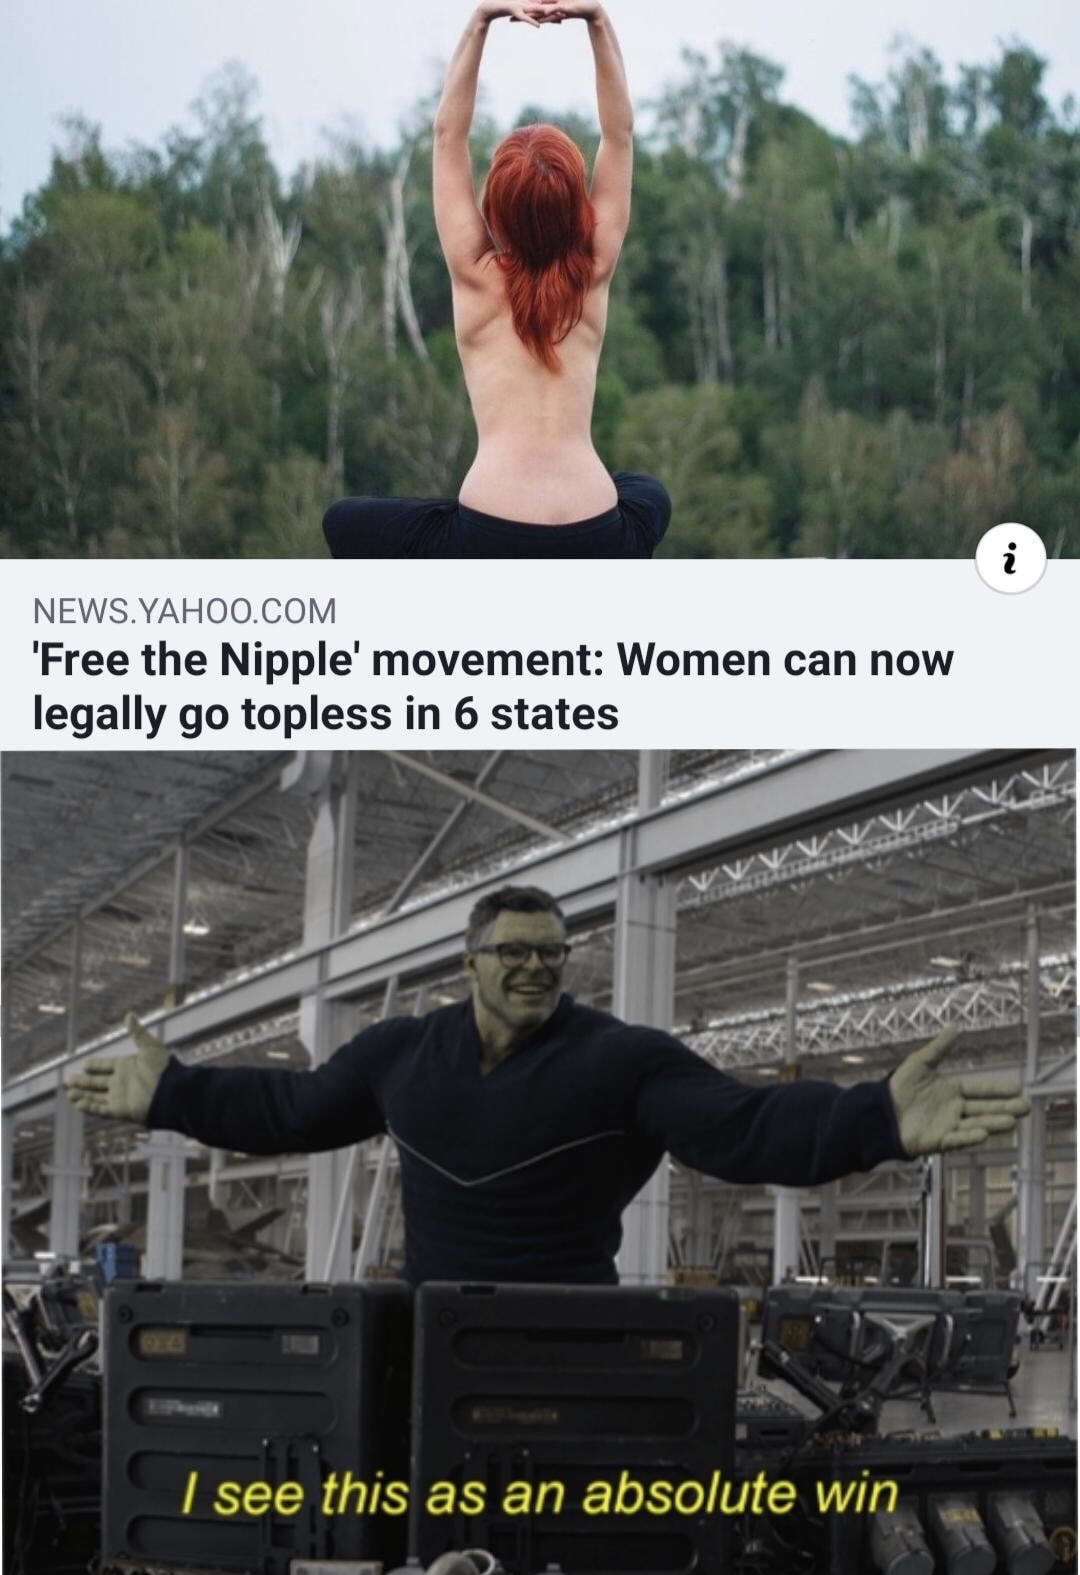 hulk meme template - News.Yahoo.Com "Free the Nipple' movement Women can now legally go topless in 6 states I see this as an absolute win